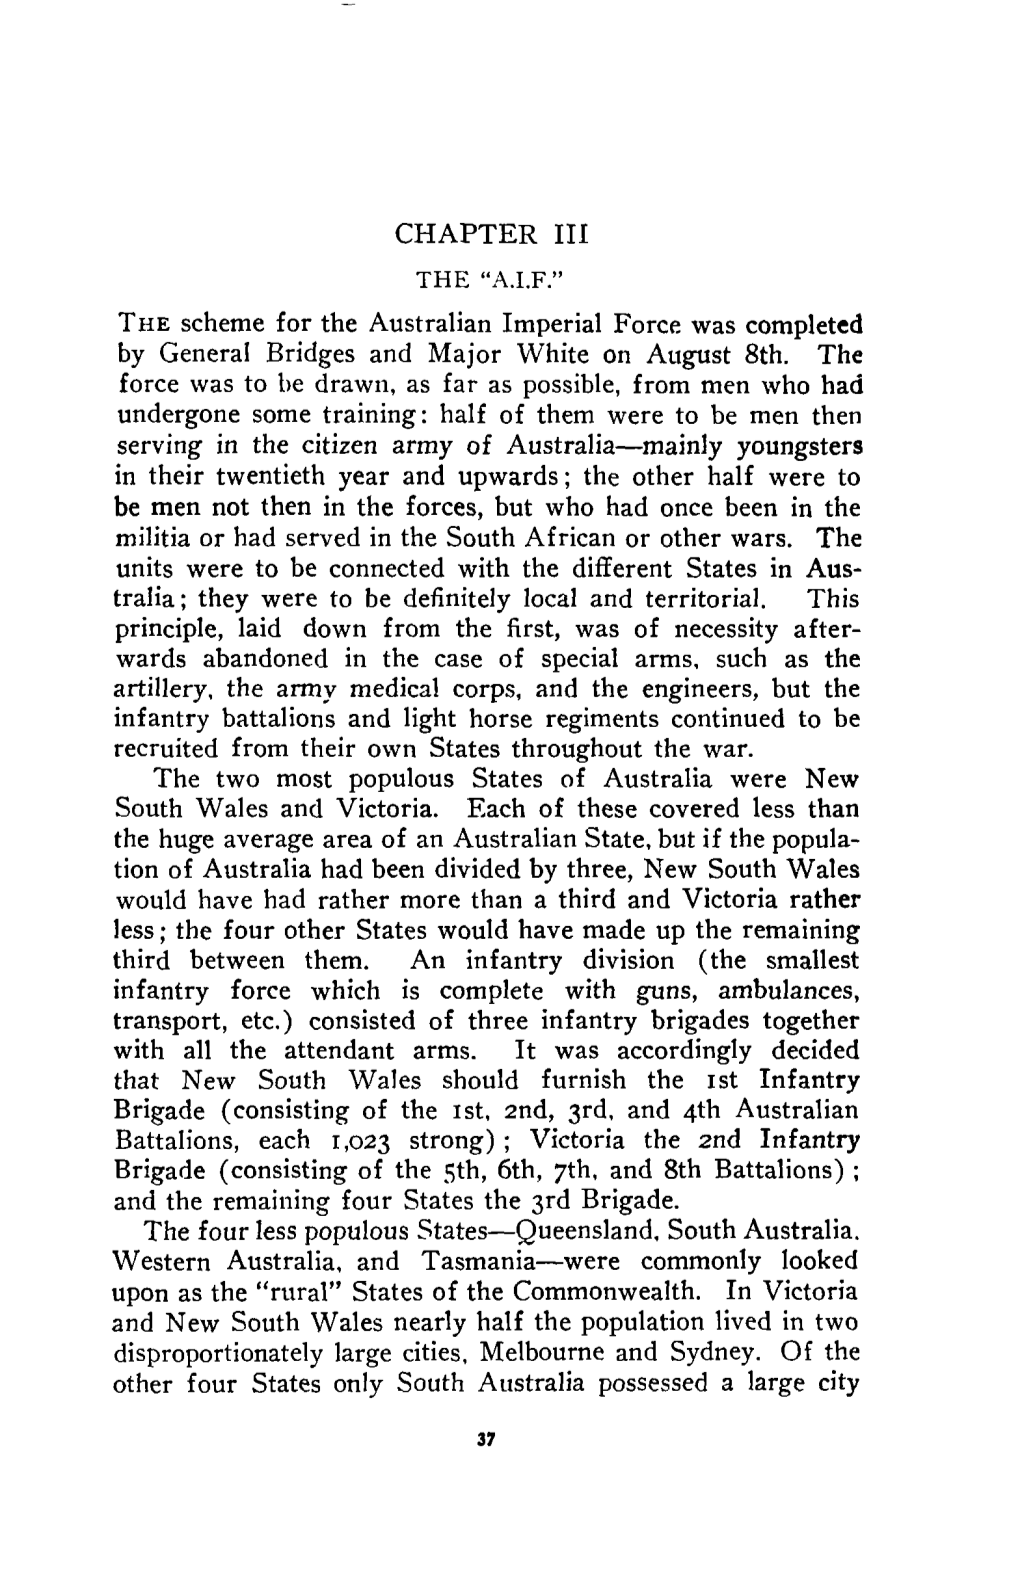 A.I.F.” Thescheme for the Australian Imperial Force Was Completed by General Bridges and Major White on August 8Th